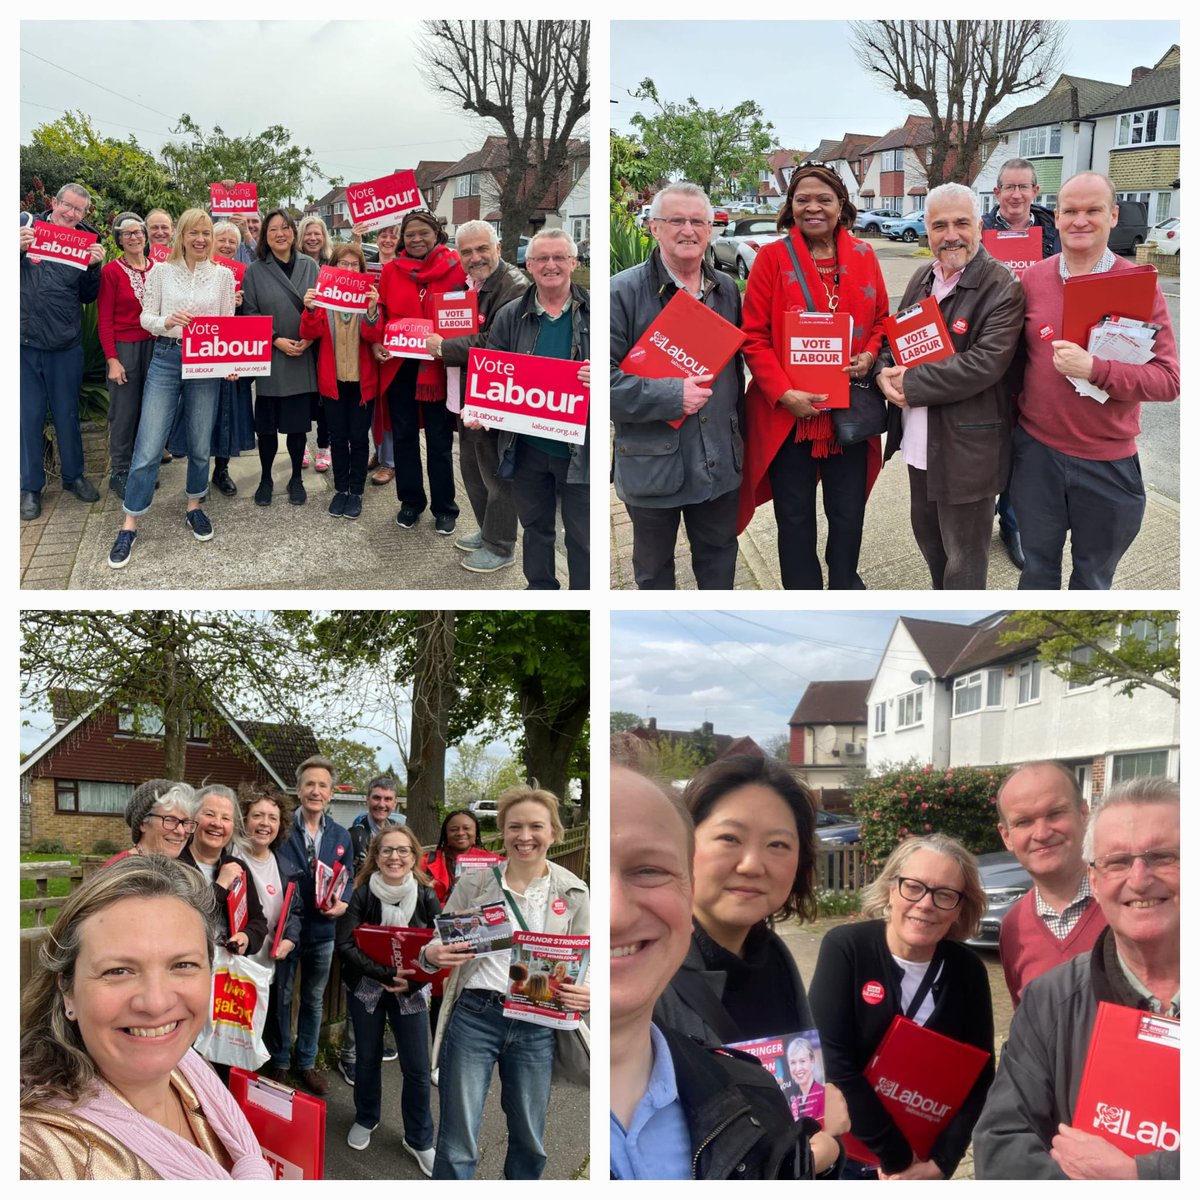 Great to have spent the day in Old Malden campaigning for @WimbledonLabour candidate @eleanorSW19 along with fellow London Assembly list candidate @borakwon. Many backing @MarcelaBenede10 for London Assembly and @SadiqKhan as mayor on May 2 and Eleanor as Labour MP for Wimbledon.